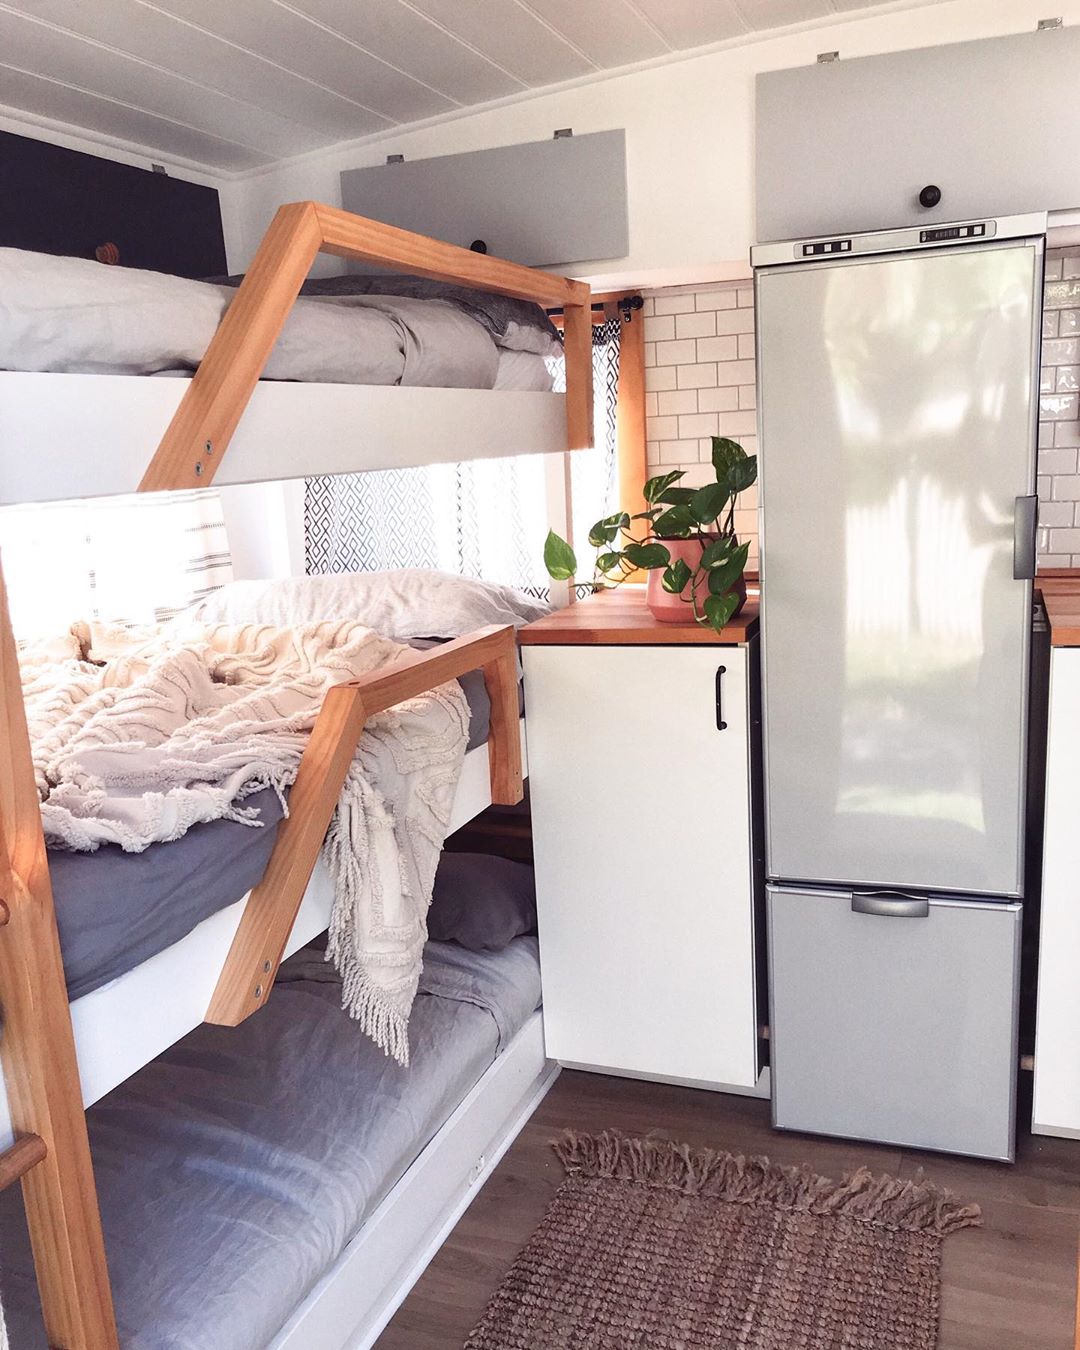 Rv Bunk Beds Obsession, Building Bunk Beds In Camper